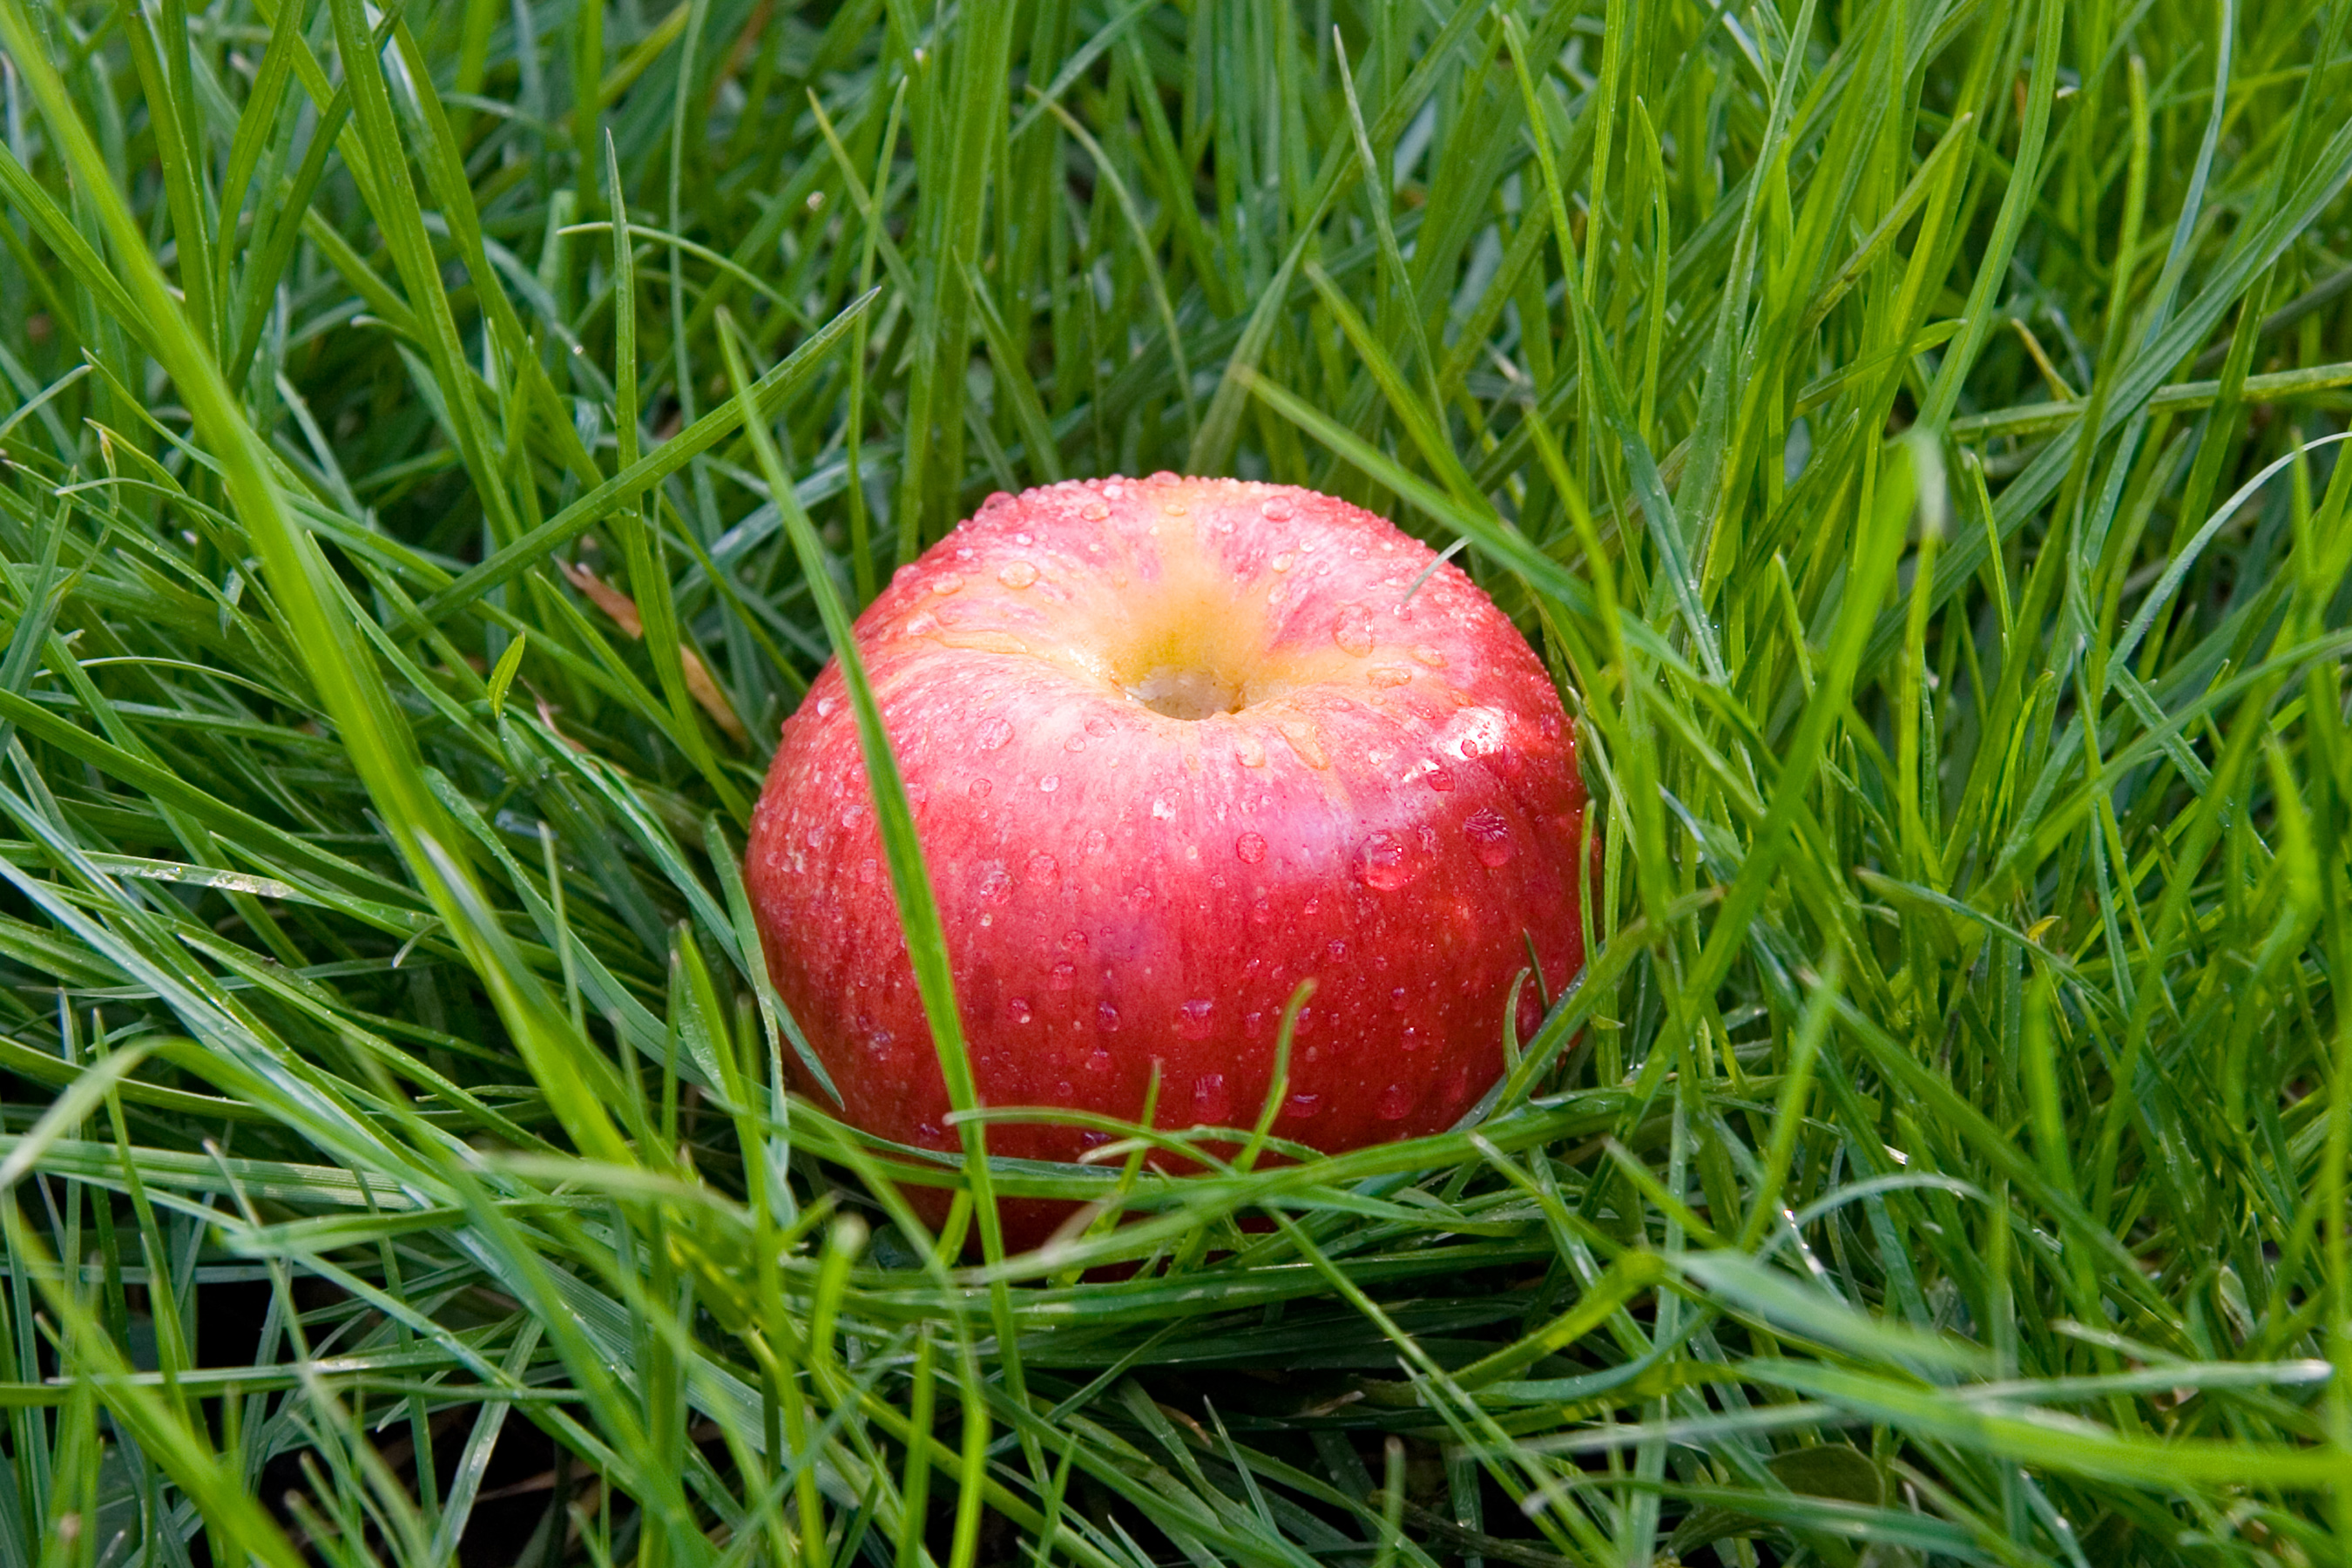 Red apple in the grass